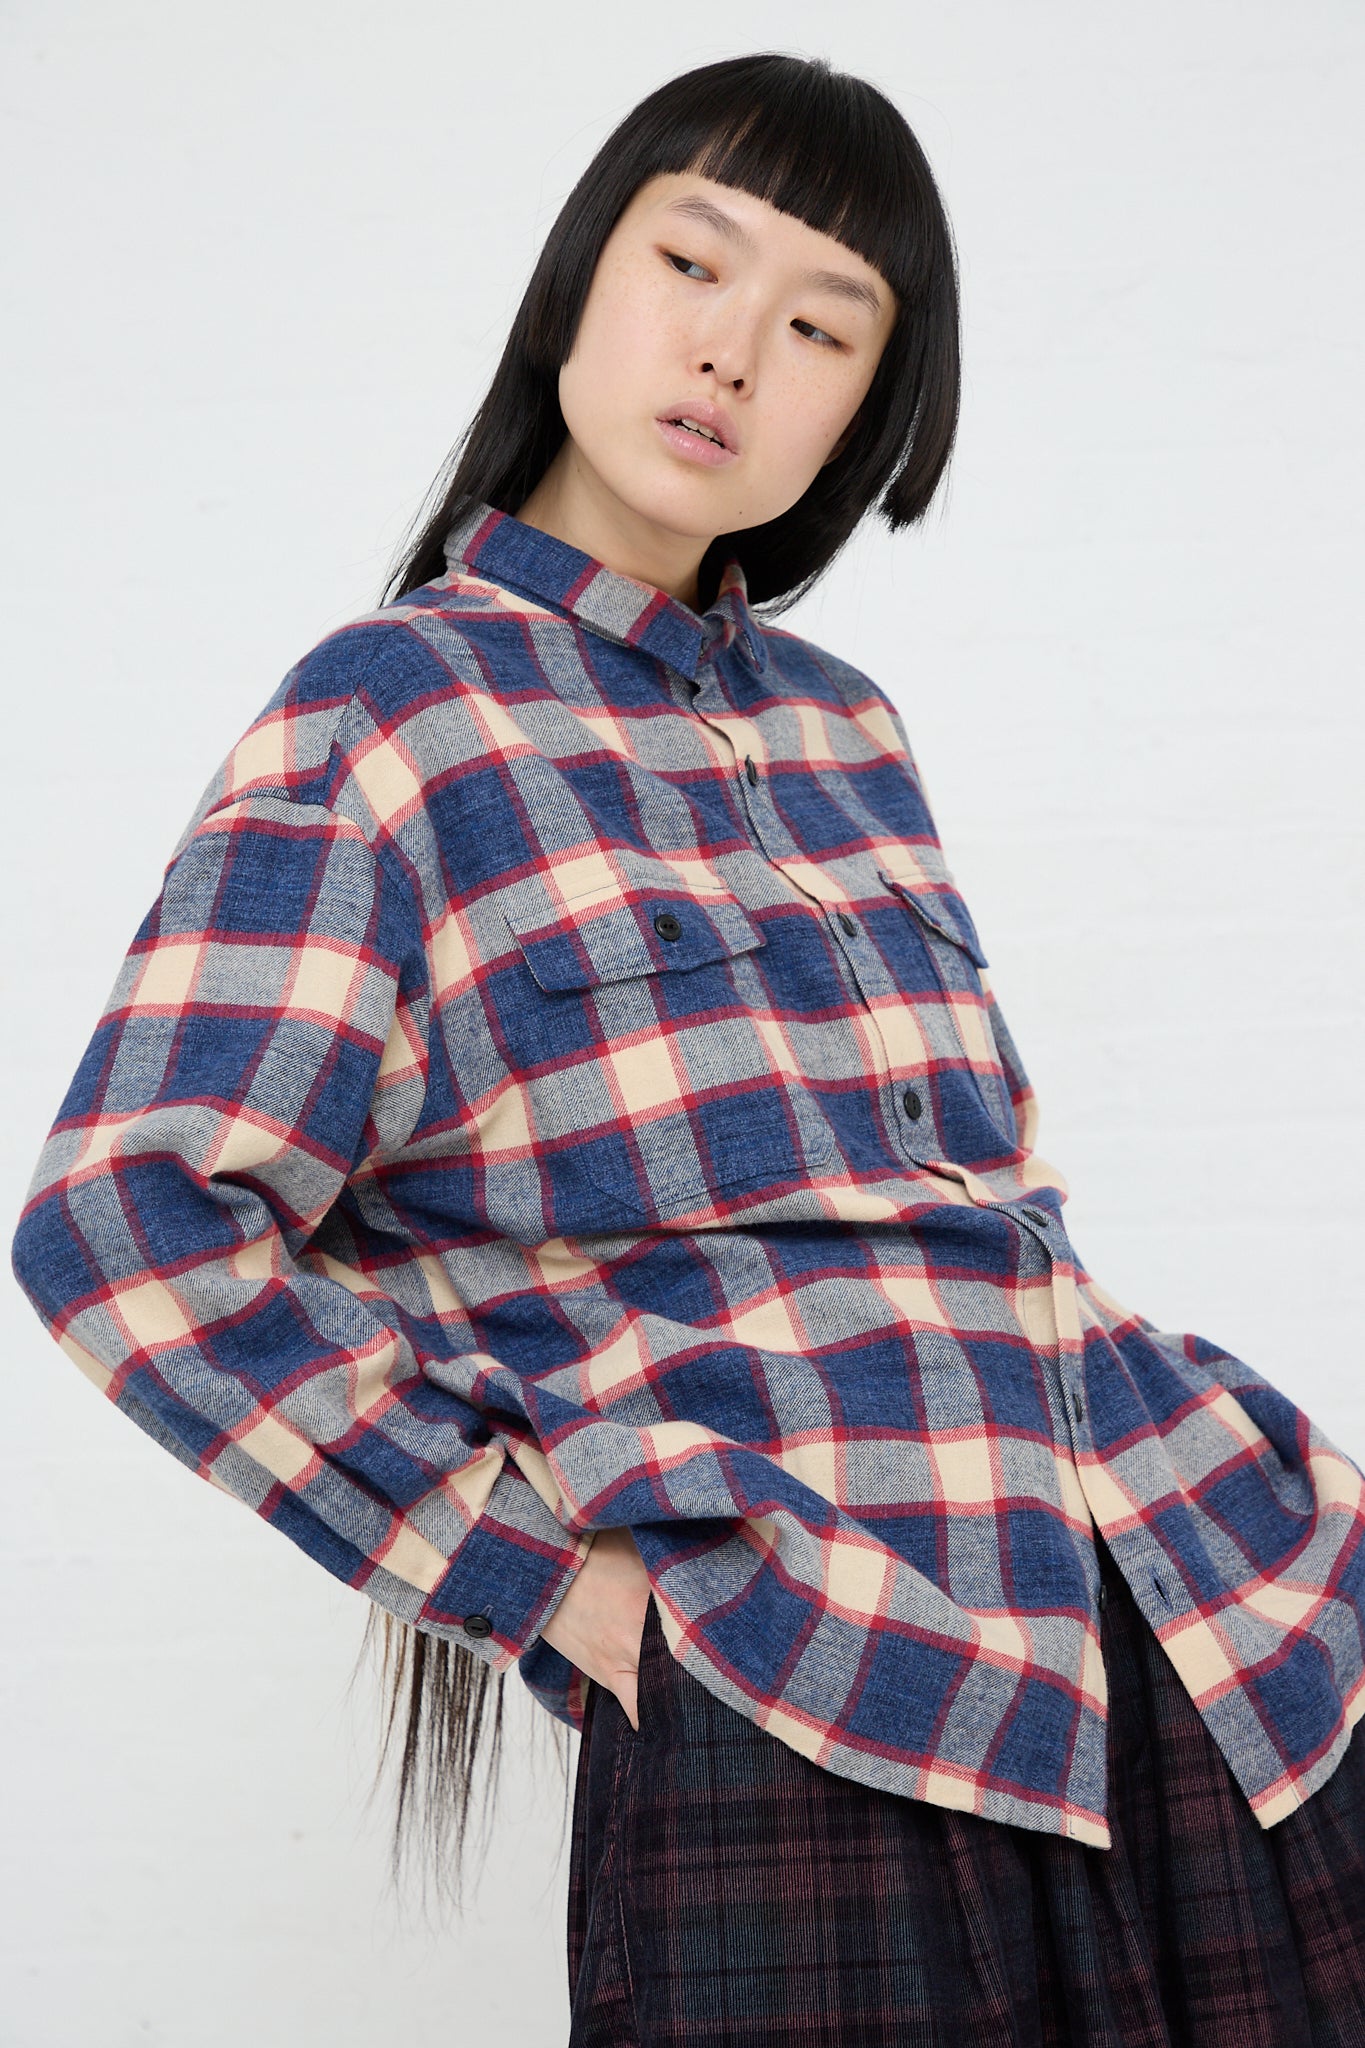 A woman wearing an Ichi woven cotton plaid long sleeve shirt in Ivory and Navy and an Ichi plaid skirt.